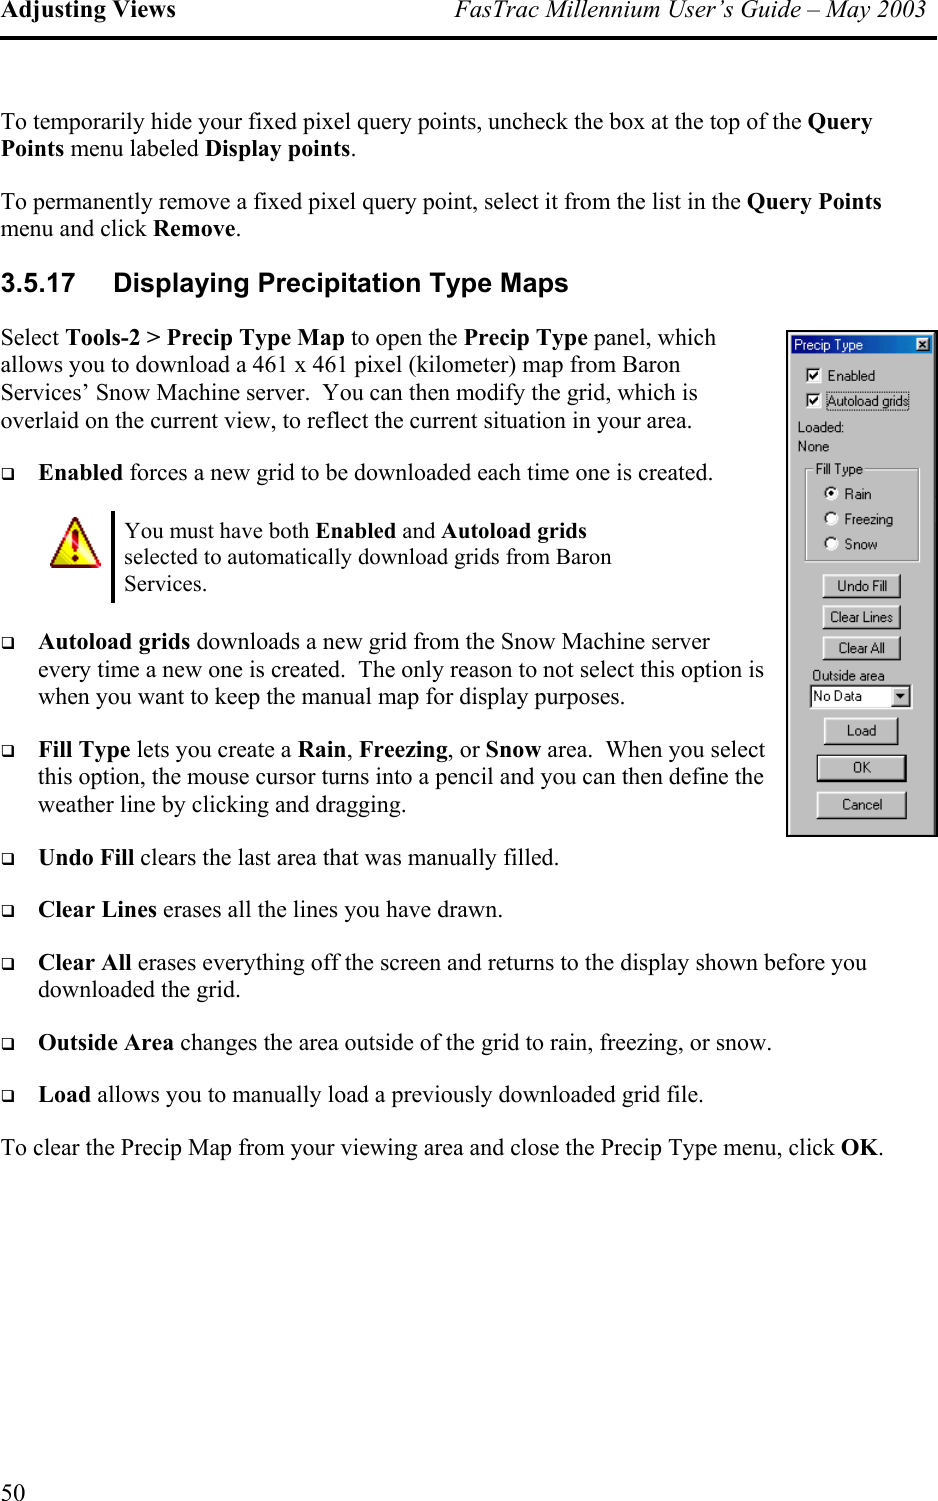 Adjusting Views  FasTrac Millennium User’s Guide – May 2003 To temporarily hide your fixed pixel query points, uncheck the box at the top of the Query Points menu labeled Display points. To permanently remove a fixed pixel query point, select it from the list in the Query Points menu and click Remove. 3.5.17  Displaying Precipitation Type Maps Select Tools-2 &gt; Precip Type Map to open the Precip Type panel, which allows you to download a 461 x 461 pixel (kilometer) map from Baron Services’ Snow Machine server.  You can then modify the grid, which is overlaid on the current view, to reflect the current situation in your area.   Enabled forces a new grid to be downloaded each time one is created.  You must have both Enabled and Autoload grids selected to automatically download grids from Baron Services.   Autoload grids downloads a new grid from the Snow Machine server every time a new one is created.  The only reason to not select this option is when you want to keep the manual map for display purposes.   Fill Type lets you create a Rain, Freezing, or Snow area.  When you select this option, the mouse cursor turns into a pencil and you can then define the weather line by clicking and dragging.   Undo Fill clears the last area that was manually filled.   Clear Lines erases all the lines you have drawn.   Clear All erases everything off the screen and returns to the display shown before you downloaded the grid.   Outside Area changes the area outside of the grid to rain, freezing, or snow.   Load allows you to manually load a previously downloaded grid file. To clear the Precip Map from your viewing area and close the Precip Type menu, click OK. 50 